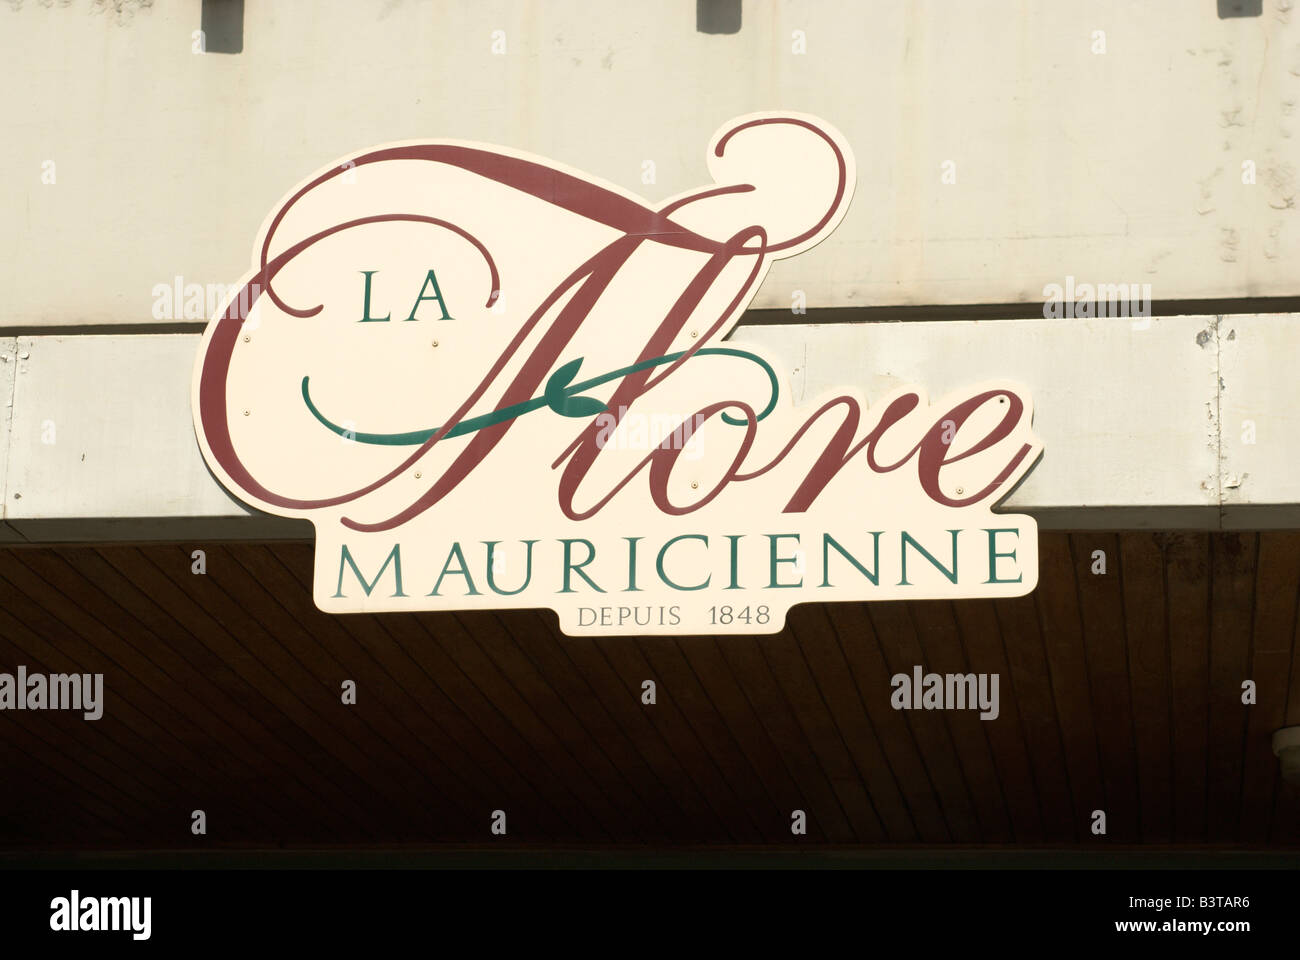 Mauritius, Port Louis. La Flore Mauricienne restaurant sign. This historical restaurant was opened in 1848. Stock Photo